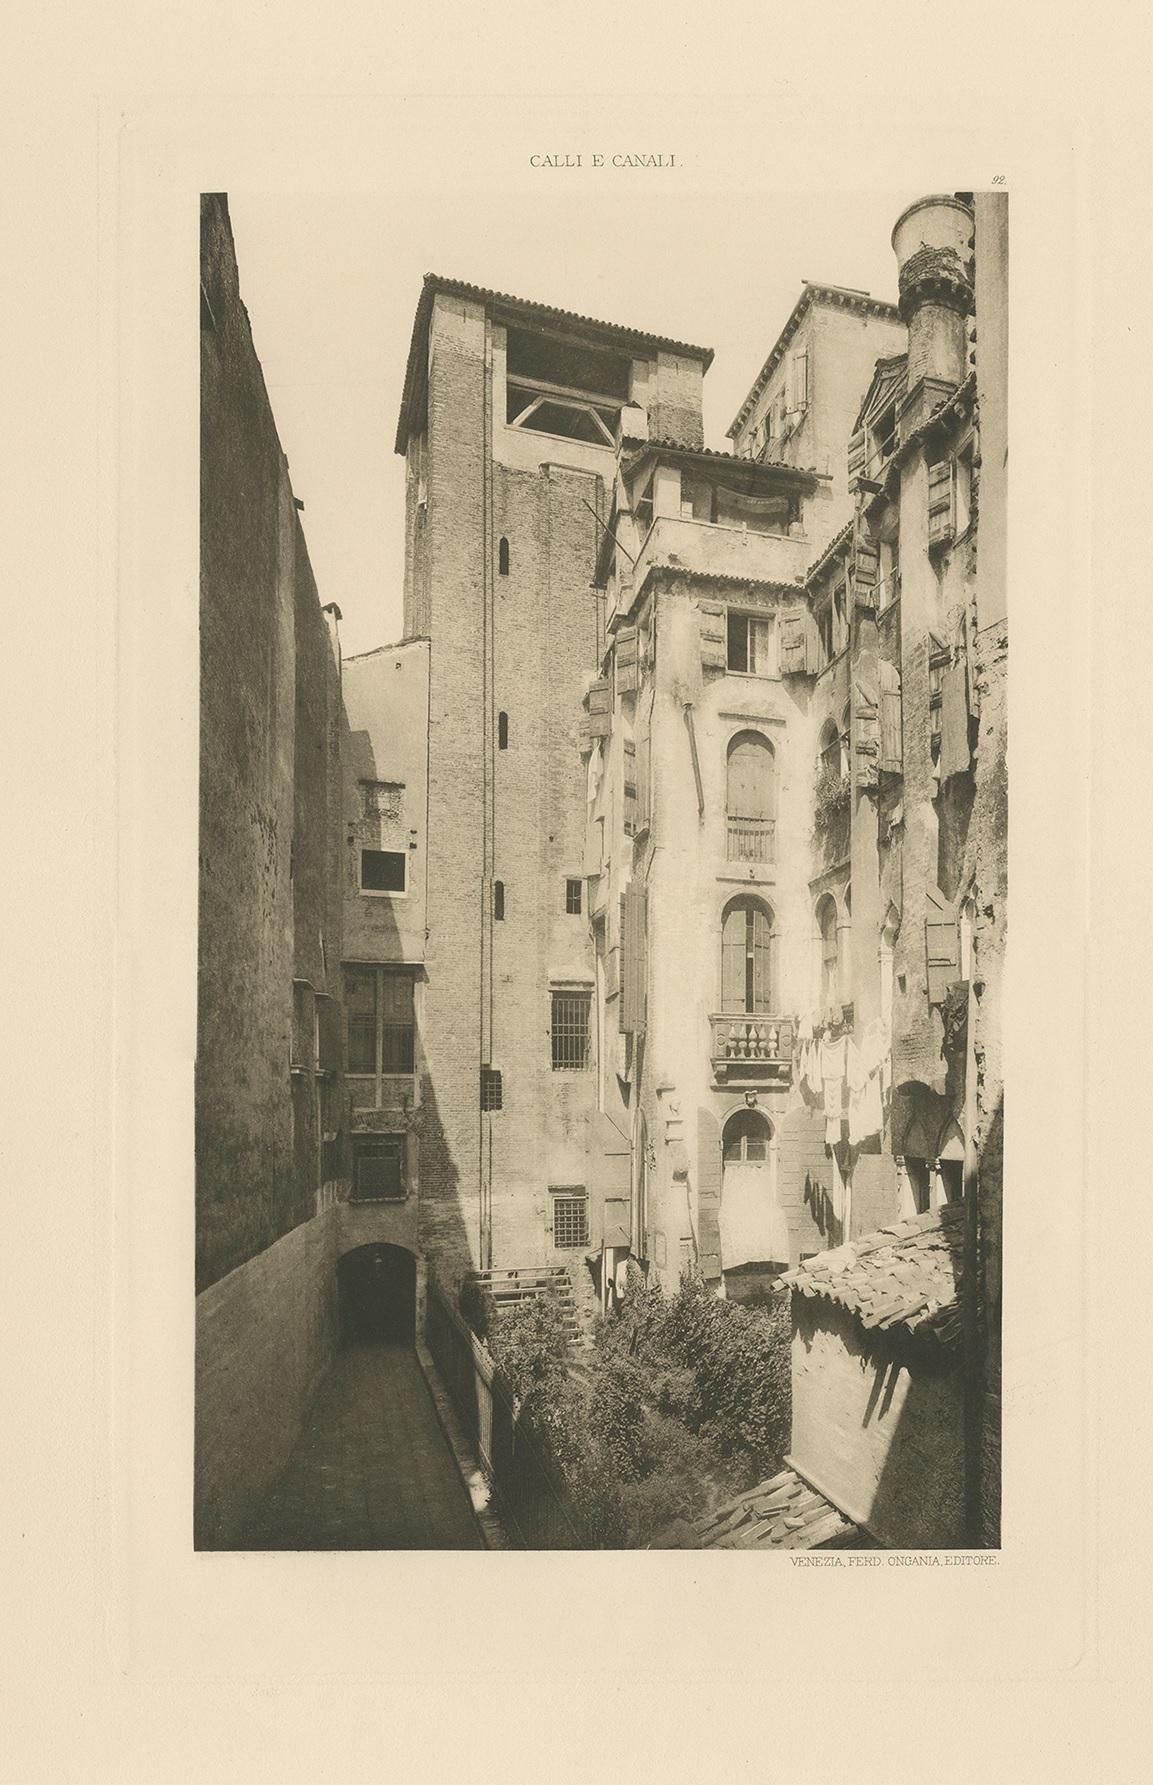 Photogravure of San Salvador in Venice, Italy. The Chiesa di San Salvatore (of the Holy Savior) is a church in Venice, northern Italy. Known in Venetian as San Salvador, is located on the Campo San Salvador, along the Merceria, the main shopping